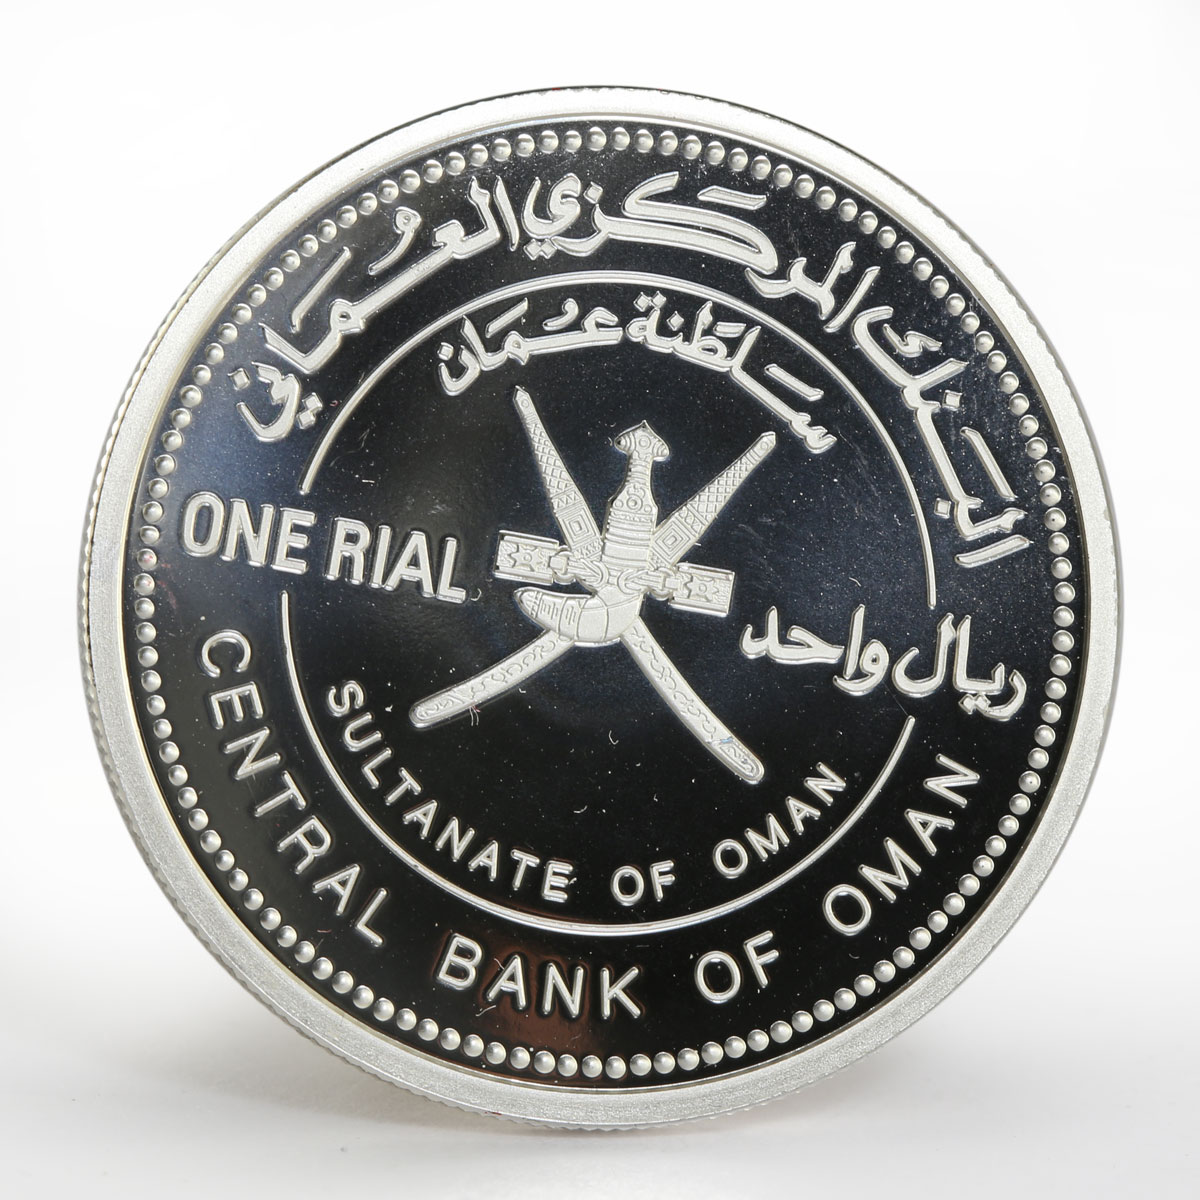 Oman 1 rial 29th GCC Summit held in Muscat coloured proof silver coin 2008